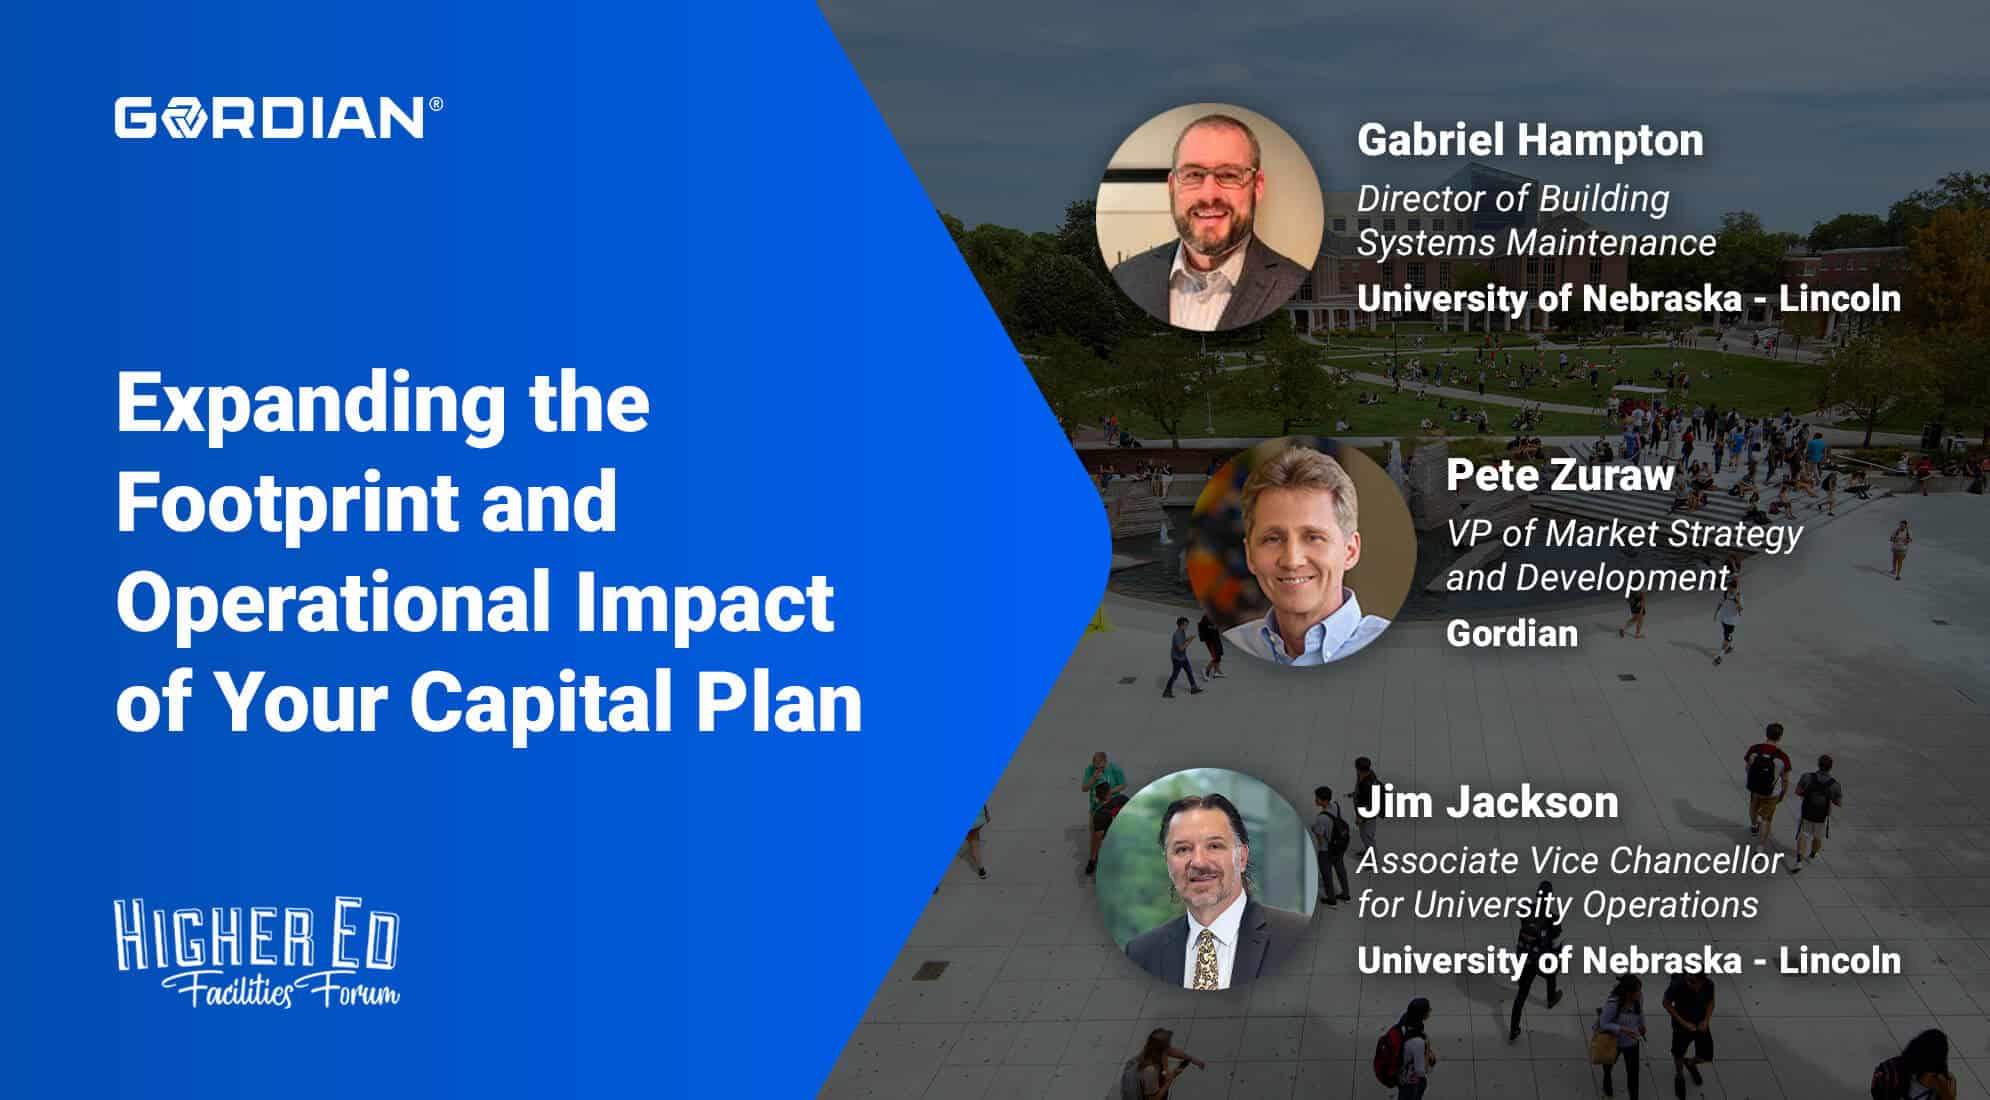 Expanding the Footprint and Operational Impact of Your Capital Plan 2